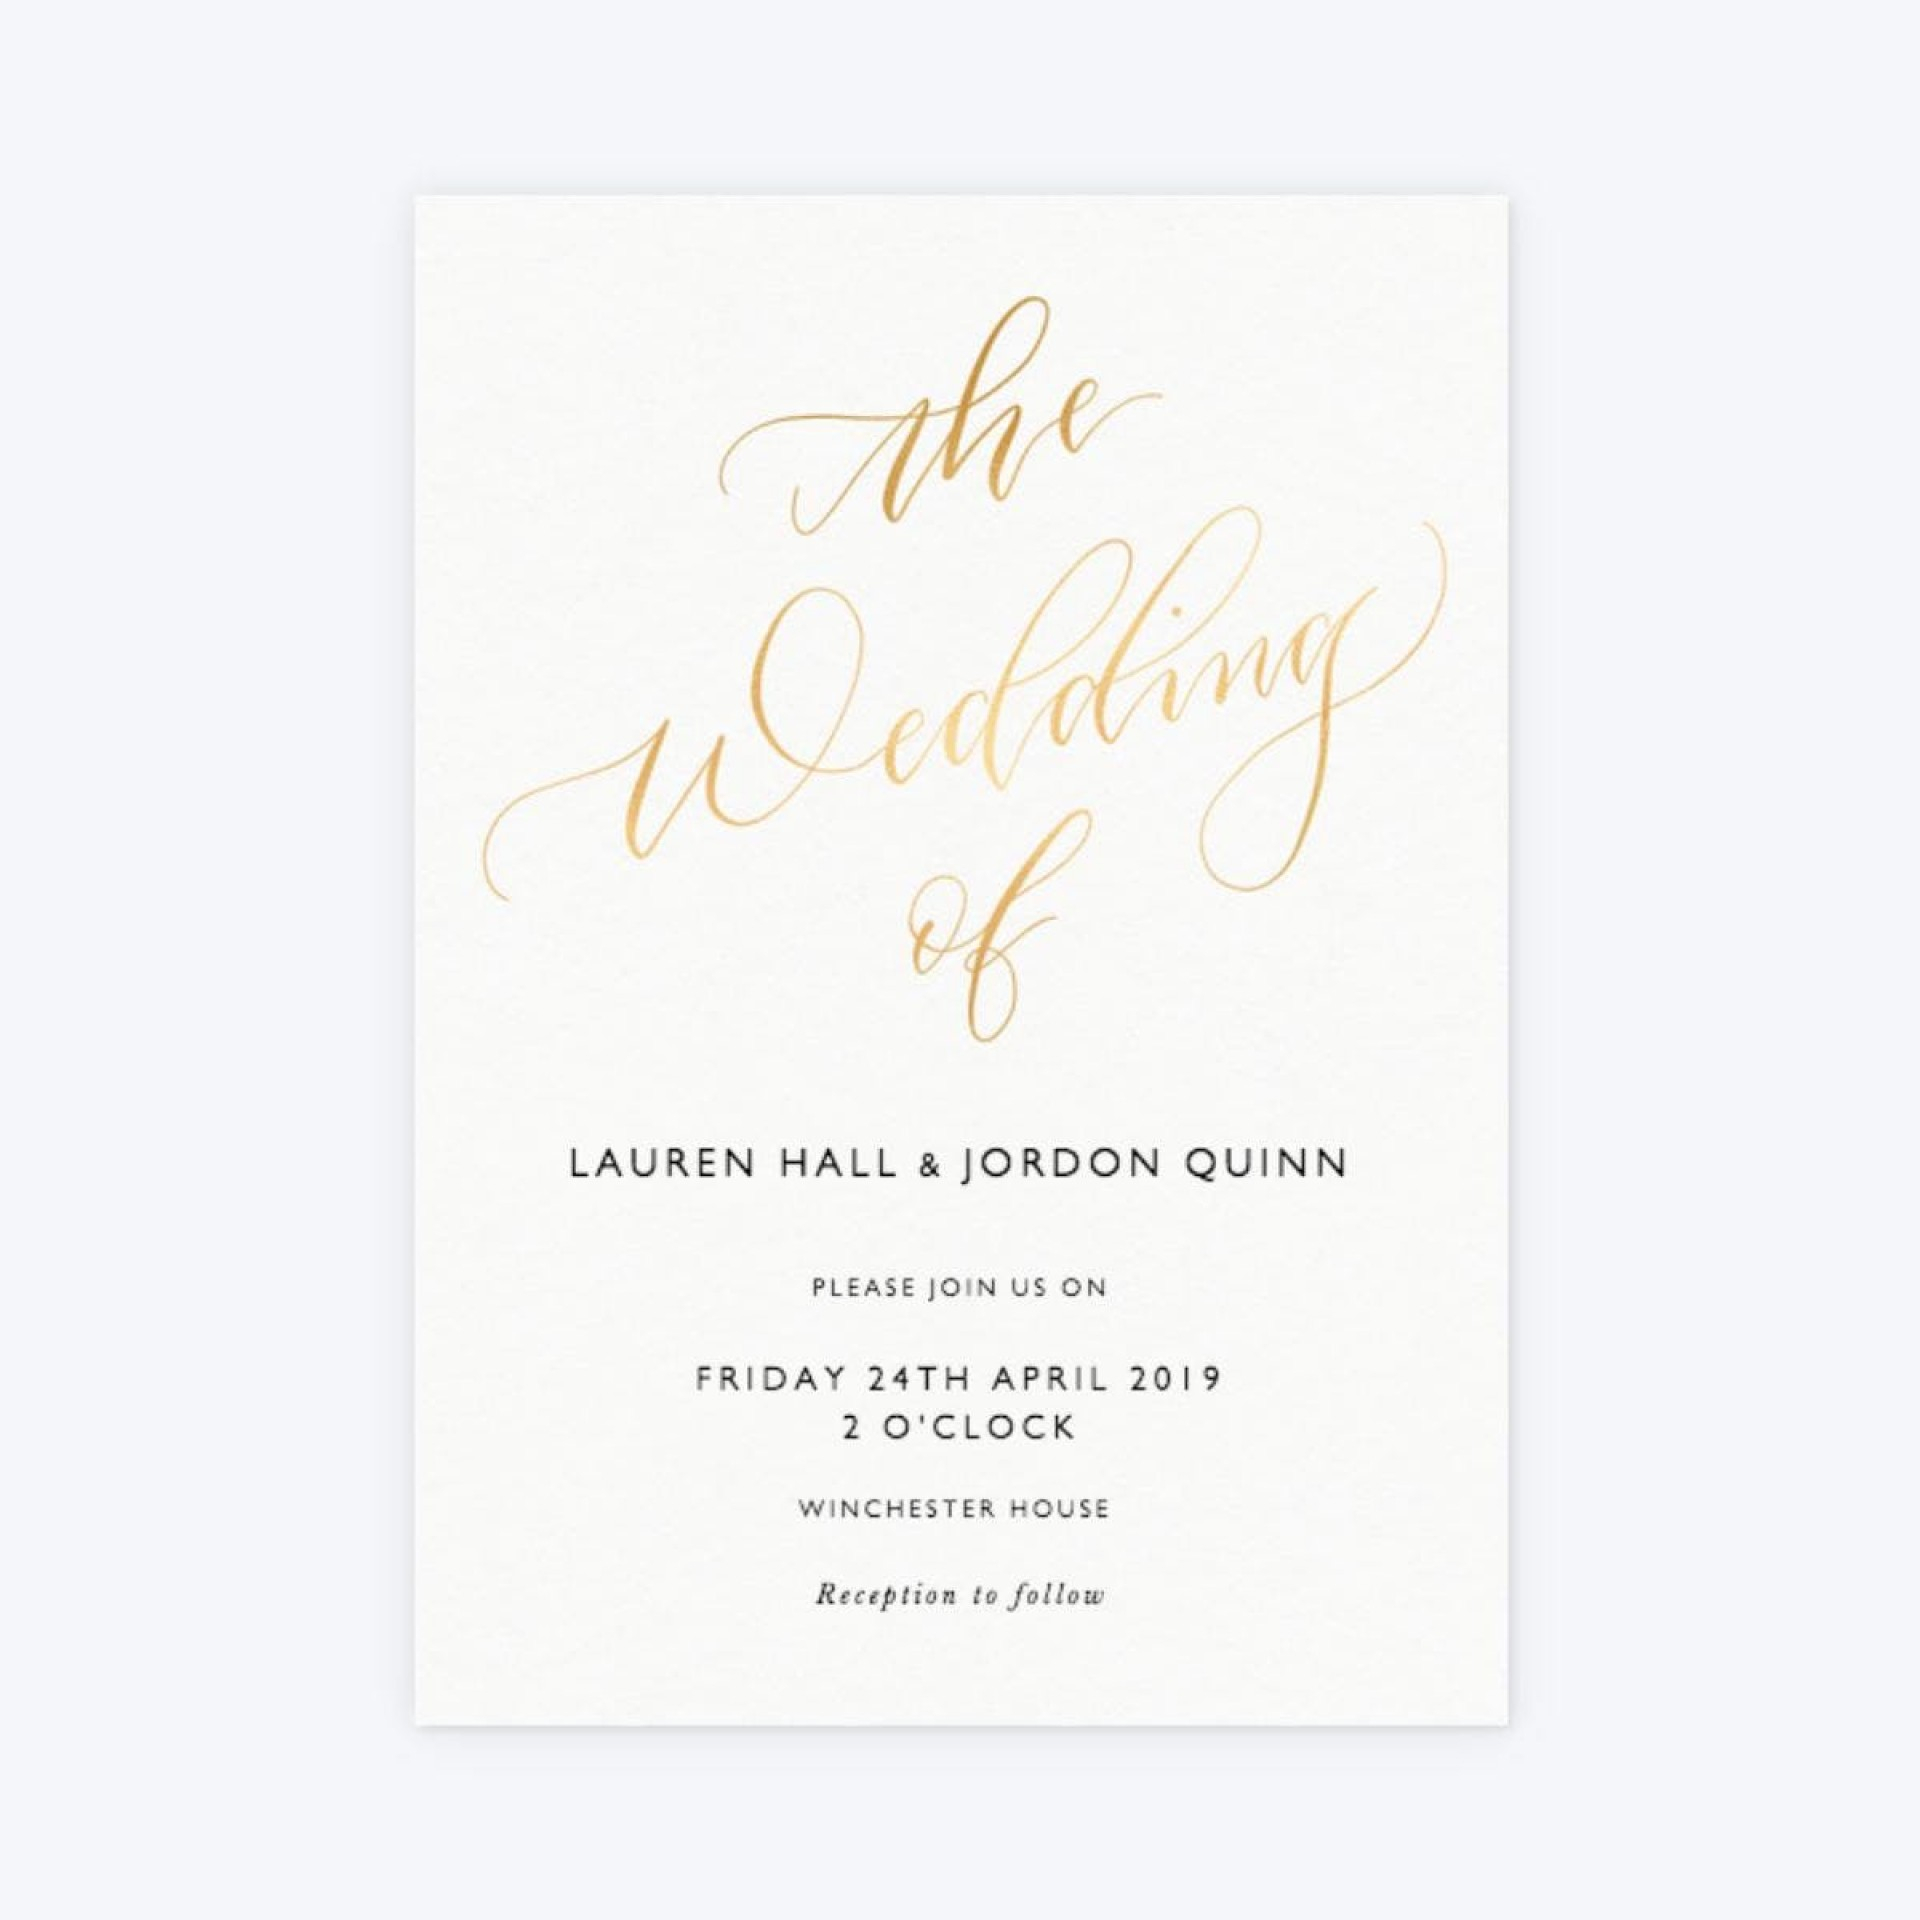 030 Wedding Registry Insert Card Template Ideas Outstanding Within Wedding Hotel Information Card Template